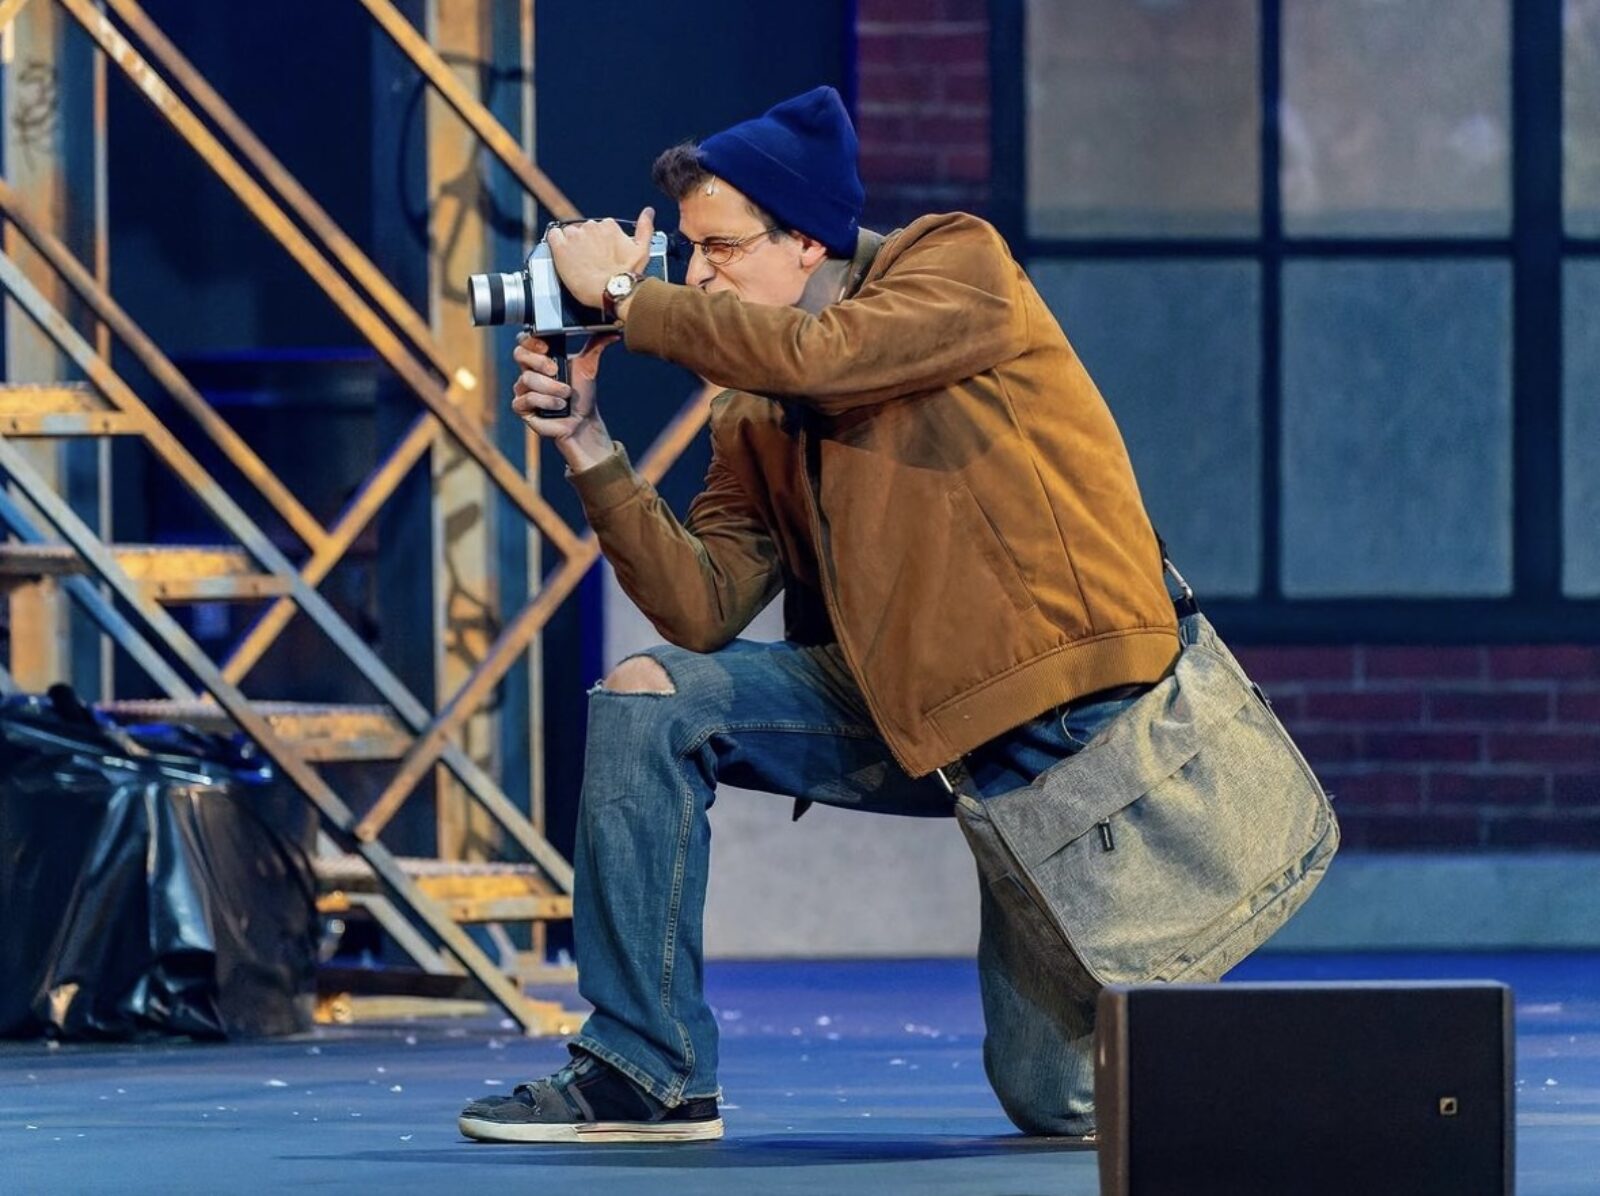 man performing on stage with camera